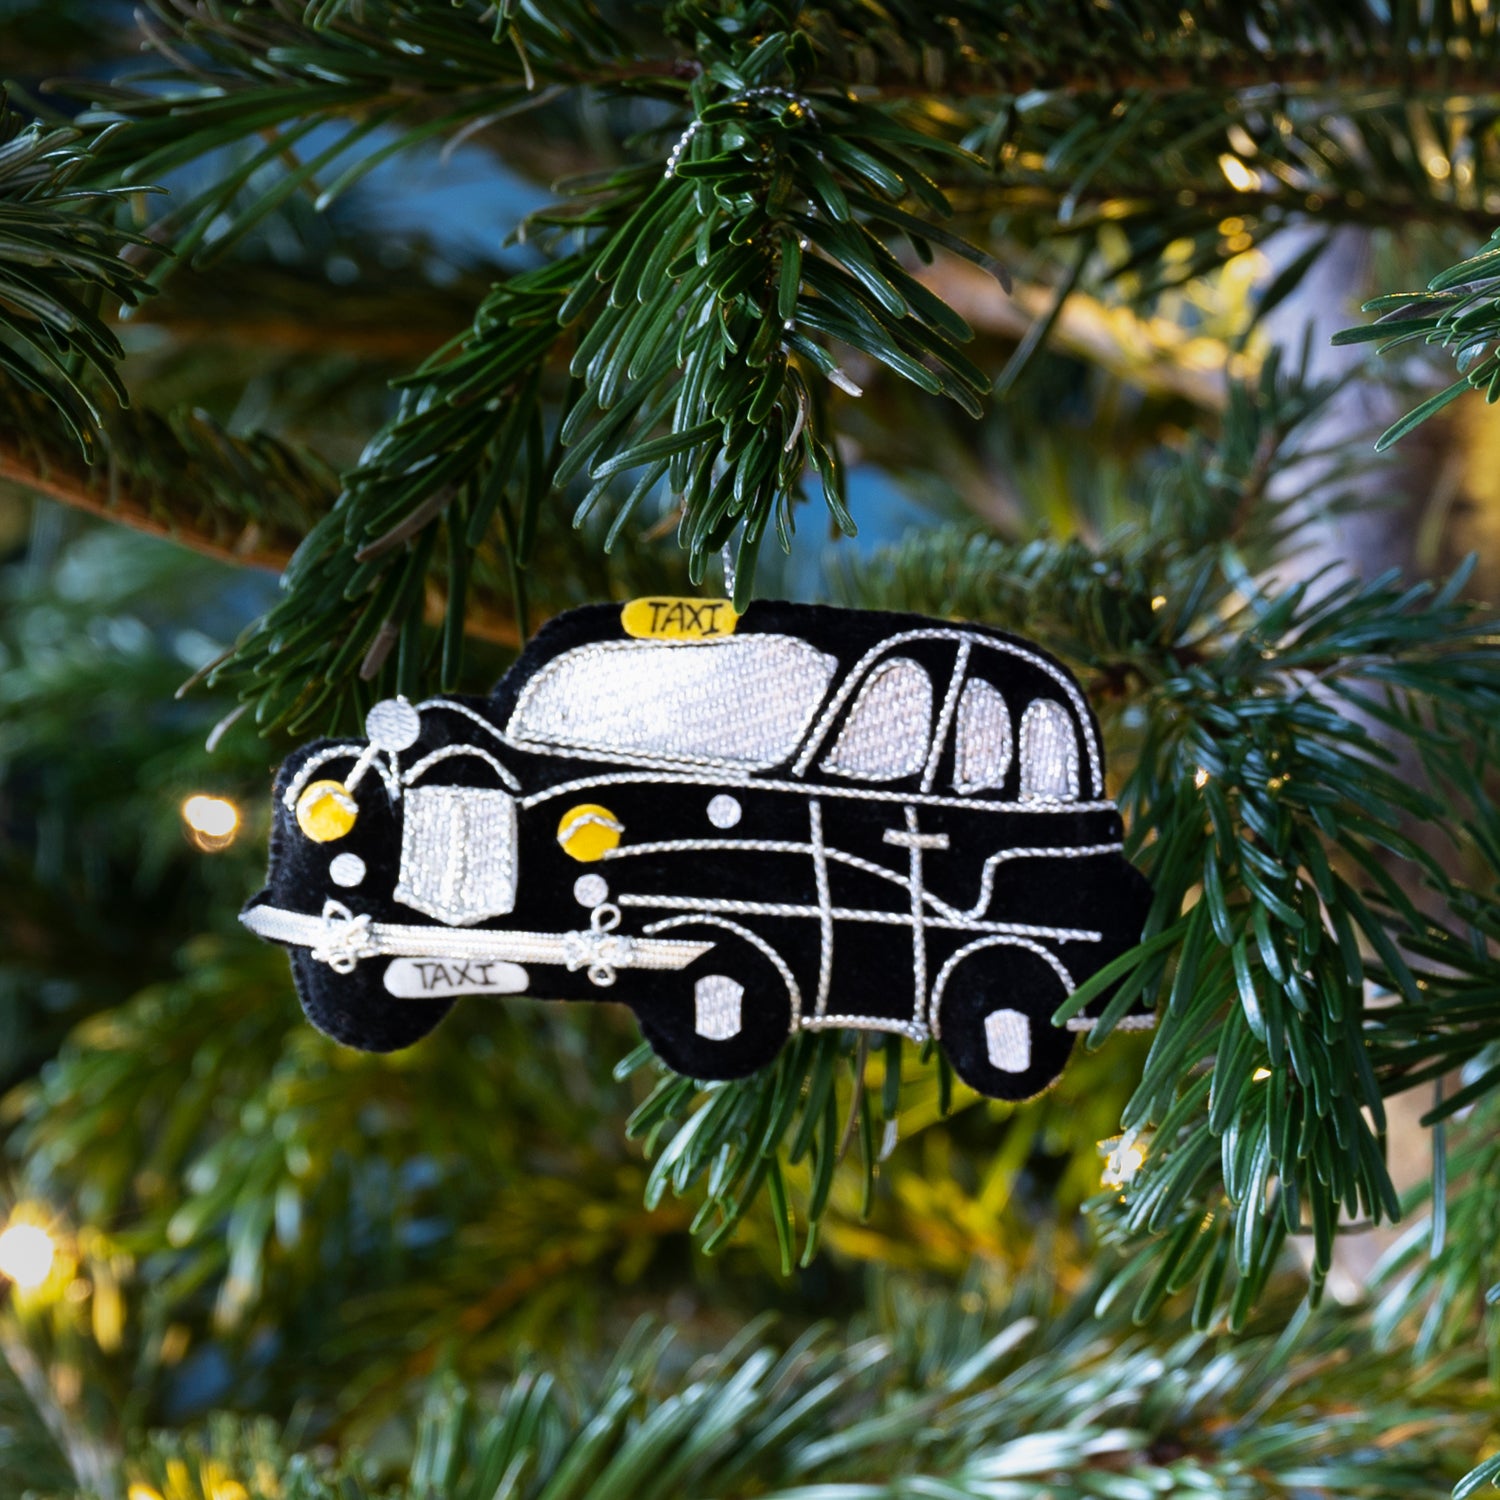 Stitched black taxi decoration hanging from Christmas tree